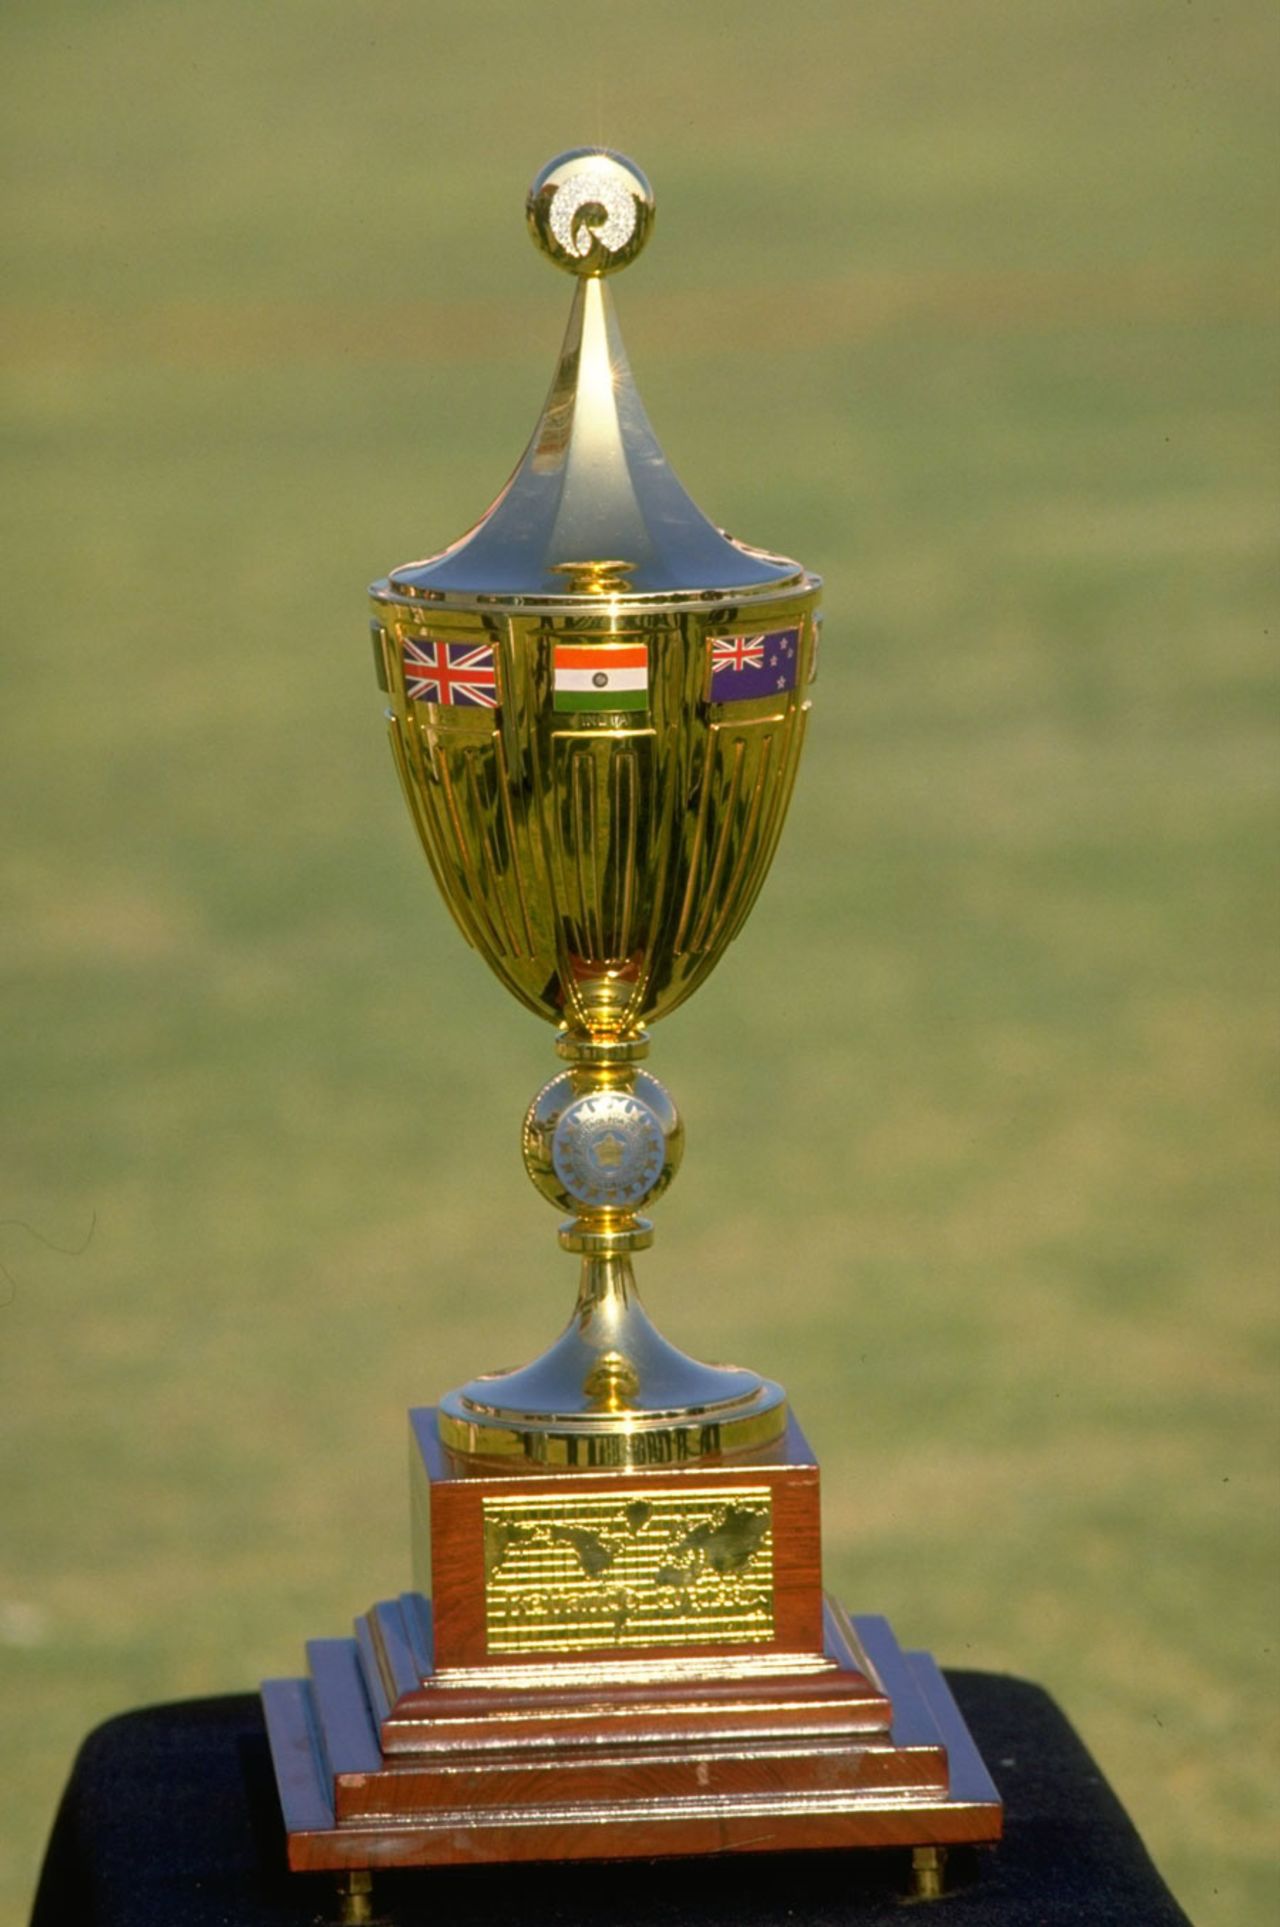 The Reliance World Cup trophy on display during the match between England and West Indies at Jaipur.